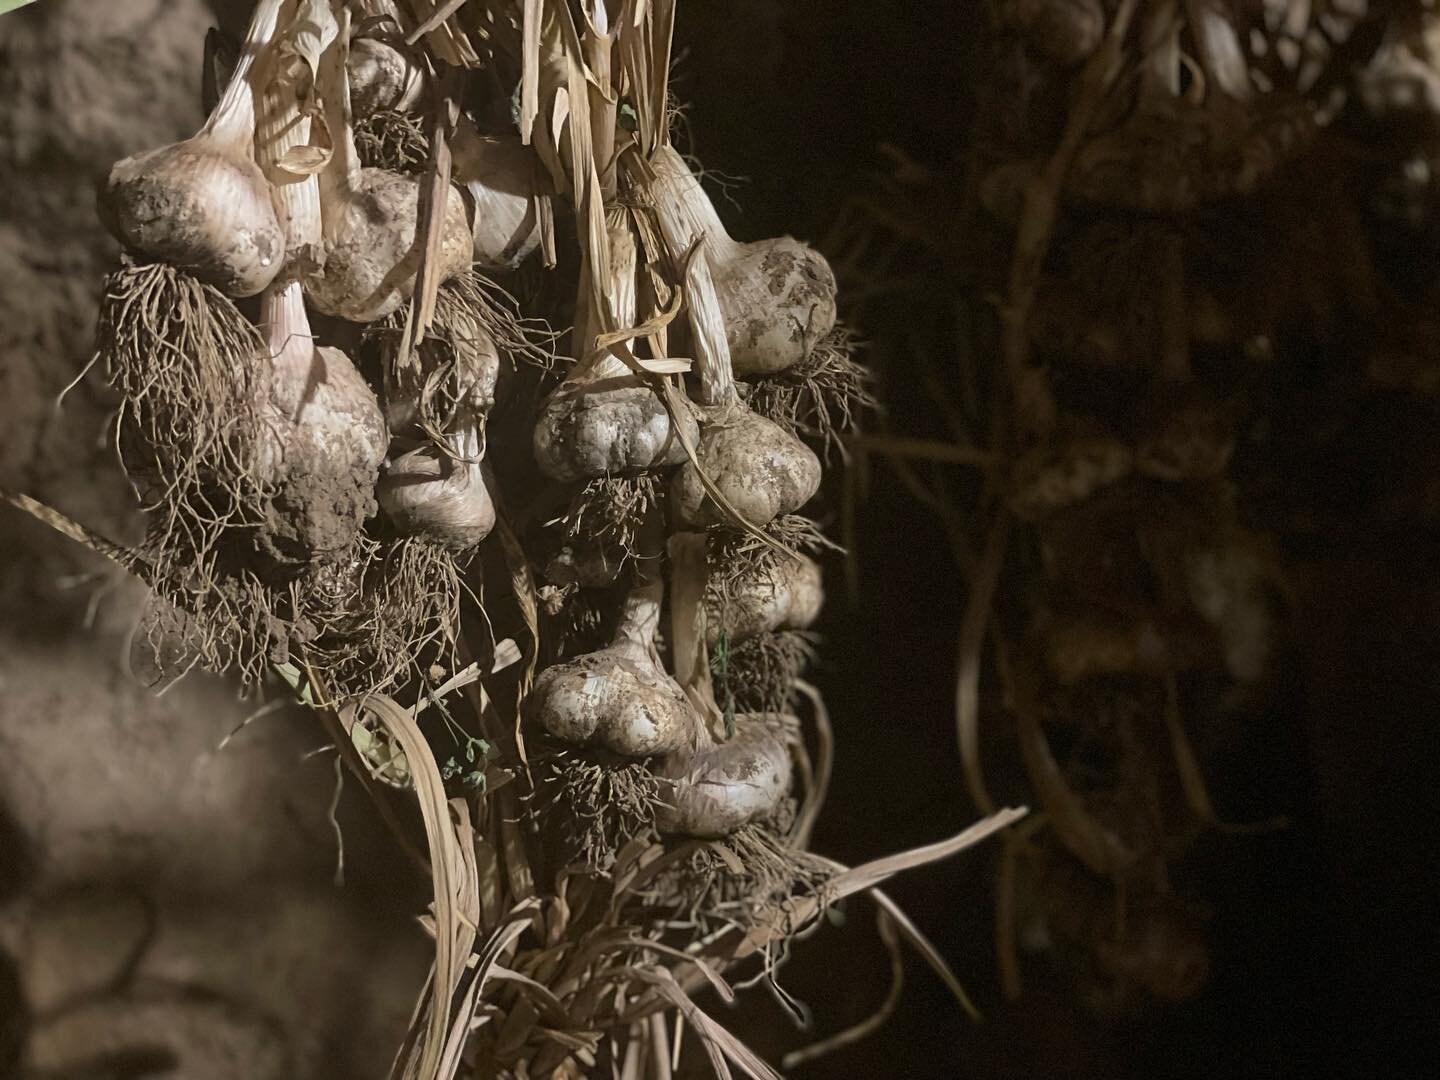 Did someone say garlic? 🧄

Our home is now a vampire free zone! 🚫

Seriously though. So. Much. Garlic! 

We&rsquo;ve had some inconsistencies with irrigation this year along with a late harvest and temps over 100F for the past couple weeks so my st